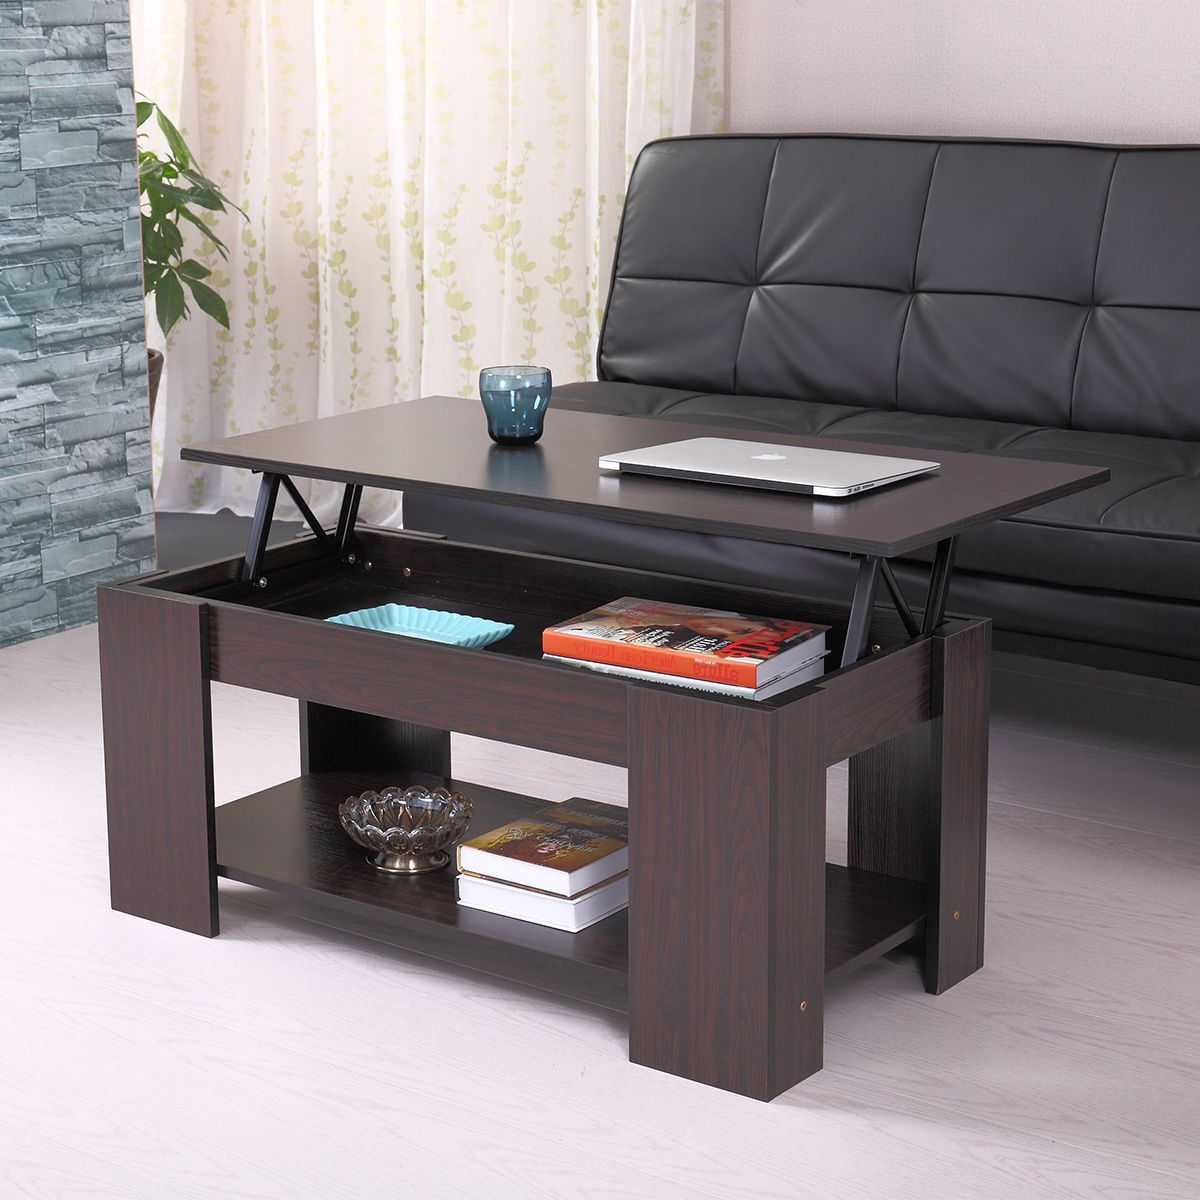 Lowestbest Lift Top Coffee Table, Walnut Coffee Table With Storage In Favorite Espresso Wood Storage Coffee Tables (View 7 of 10)